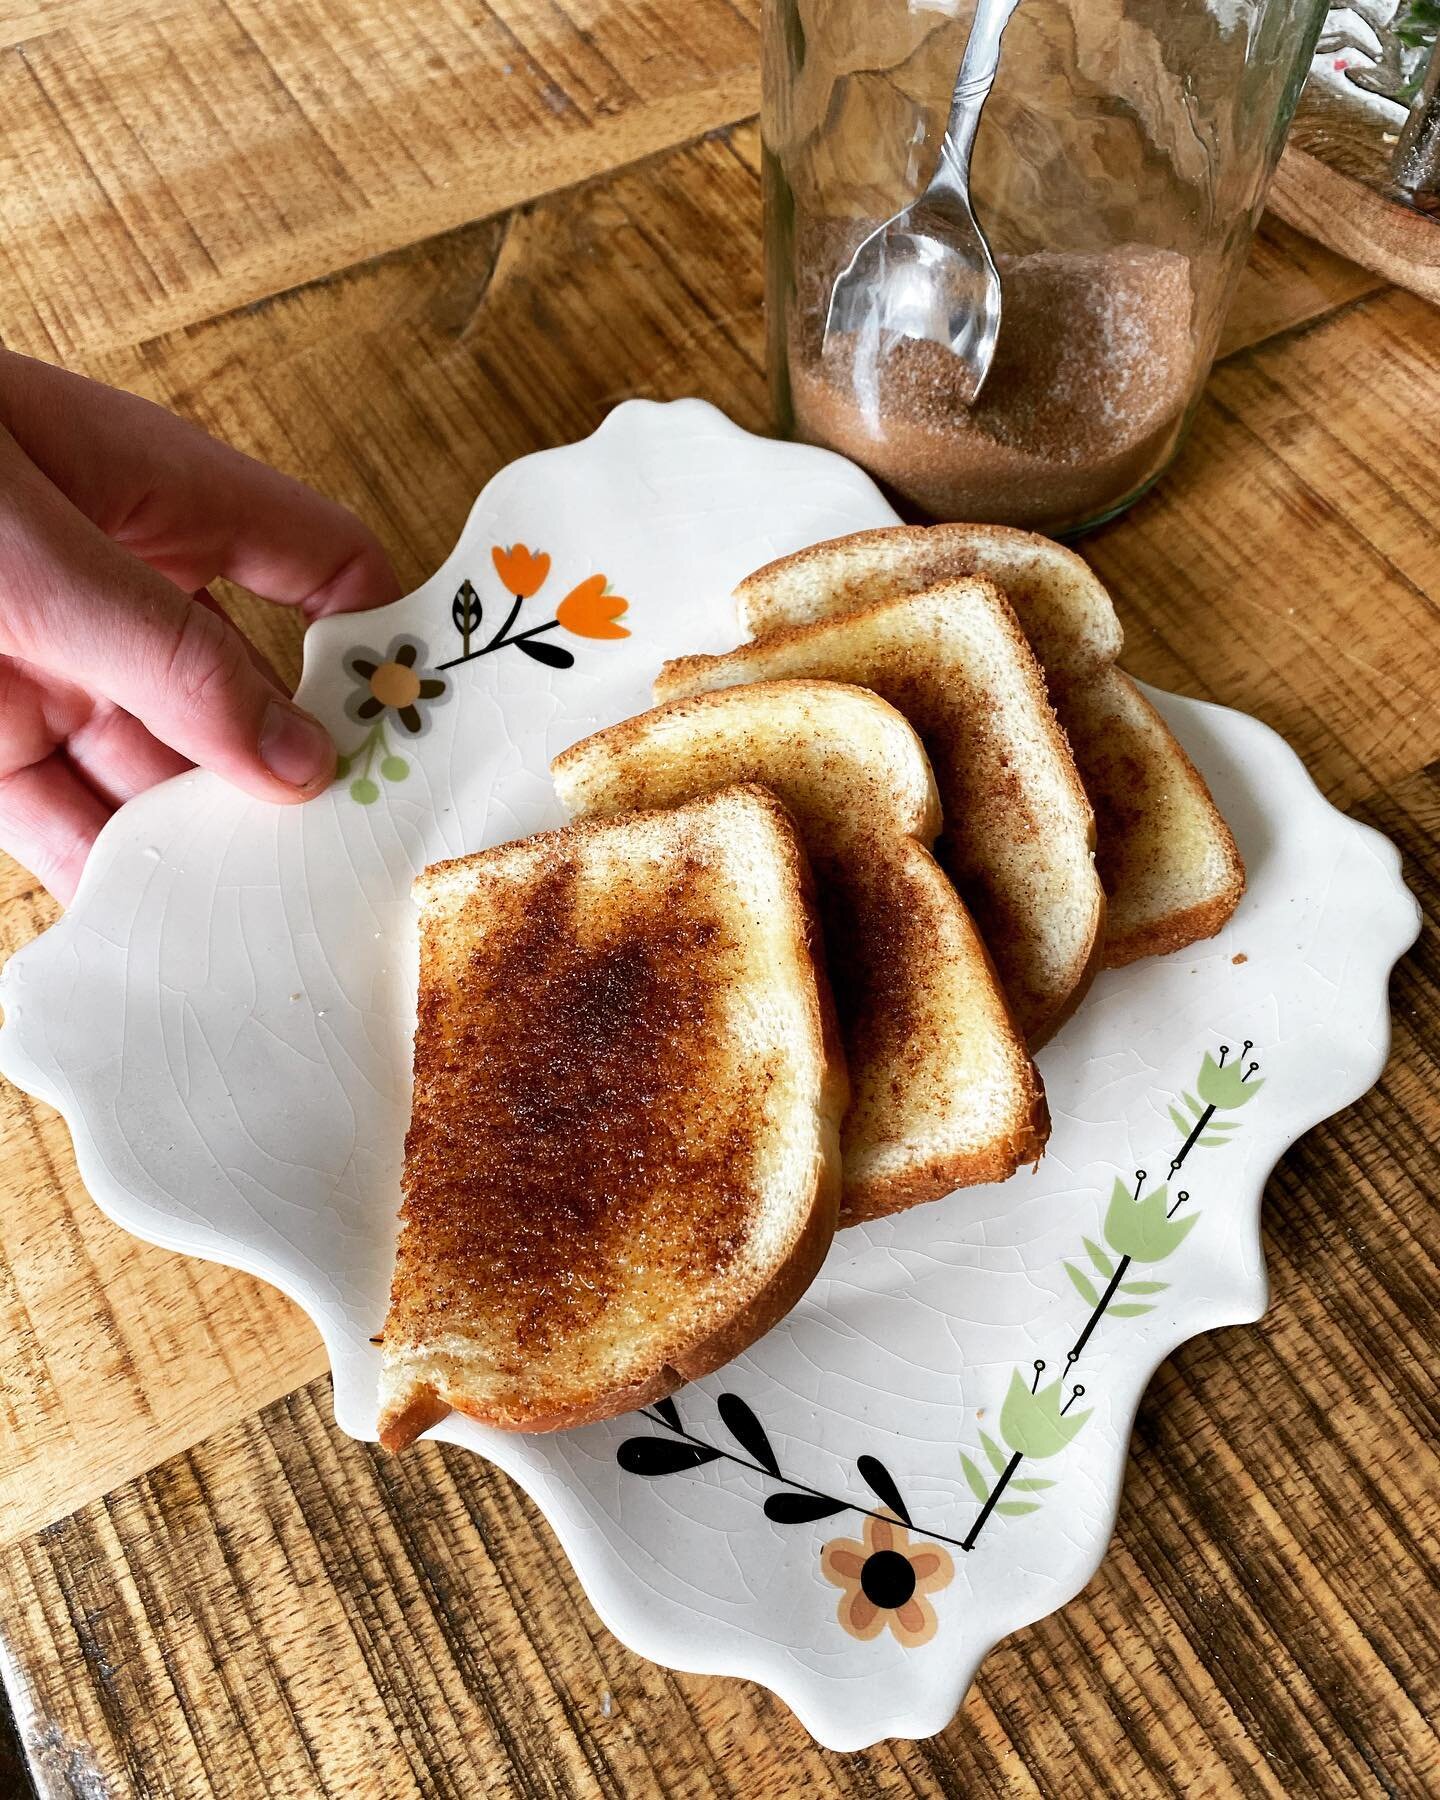 establishing a routine of making breakfast for kids can be as simple as toast...it&rsquo;s the connection not the effort that&rsquo;s important. Handing a child food with a smile, eye contact and a focus on speaking forward into the life of the child